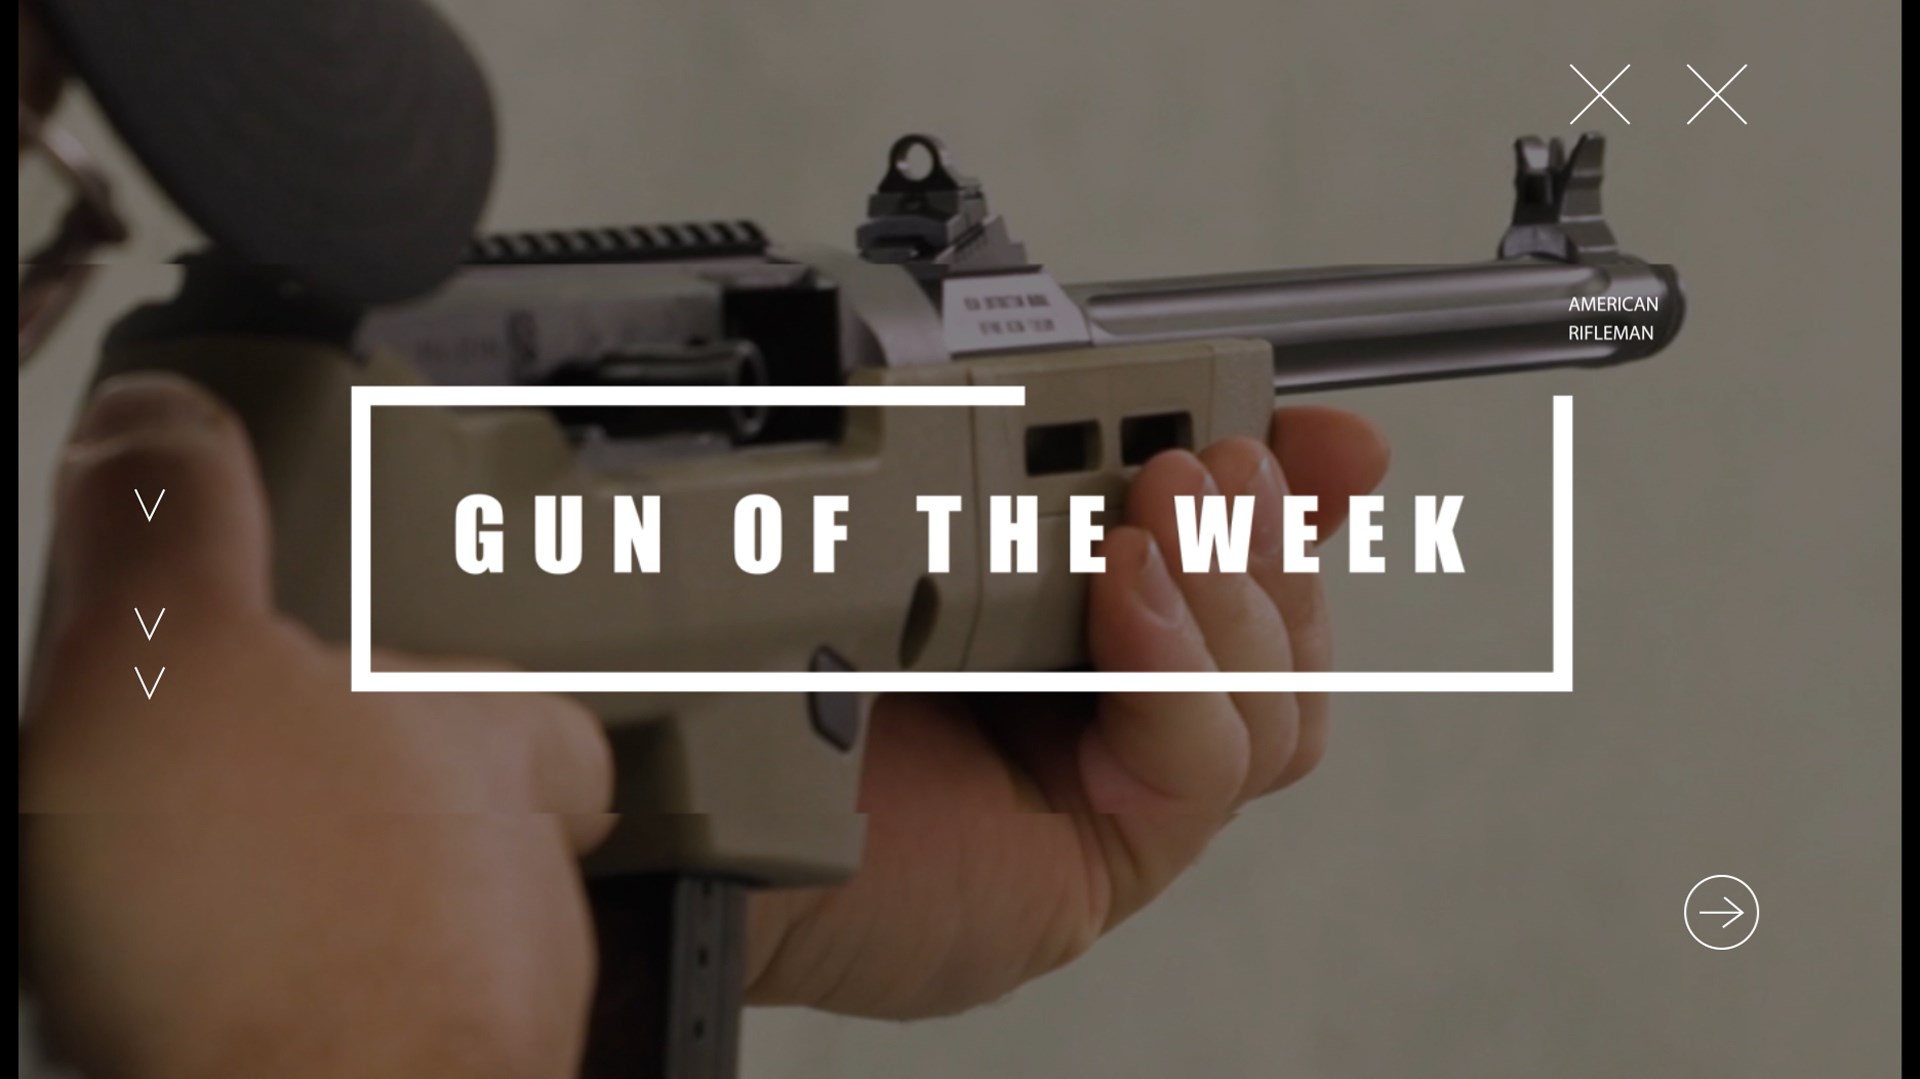 title screen from video text on image noting GUN OF THE WEEK with ruger PC Carbine takedown rifle in background shooting gun rifle indoor gun range